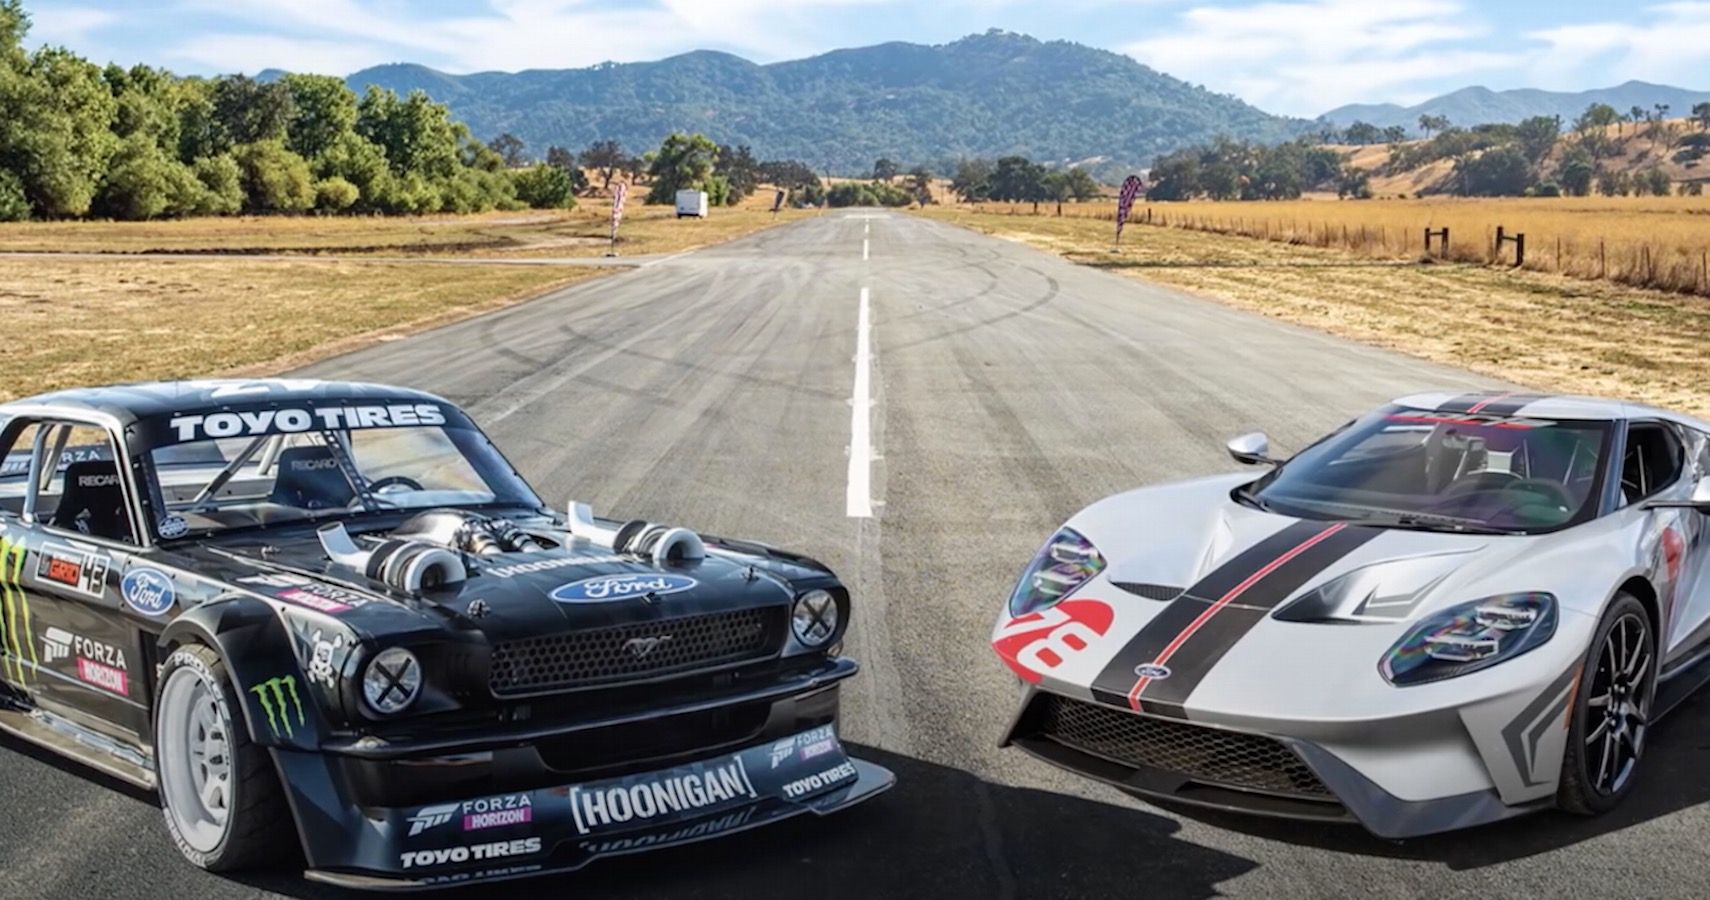 Ford Vs Ford: Watch The 1400-HP Mustang Hoonicorn Drag Race A GT Carbon Series